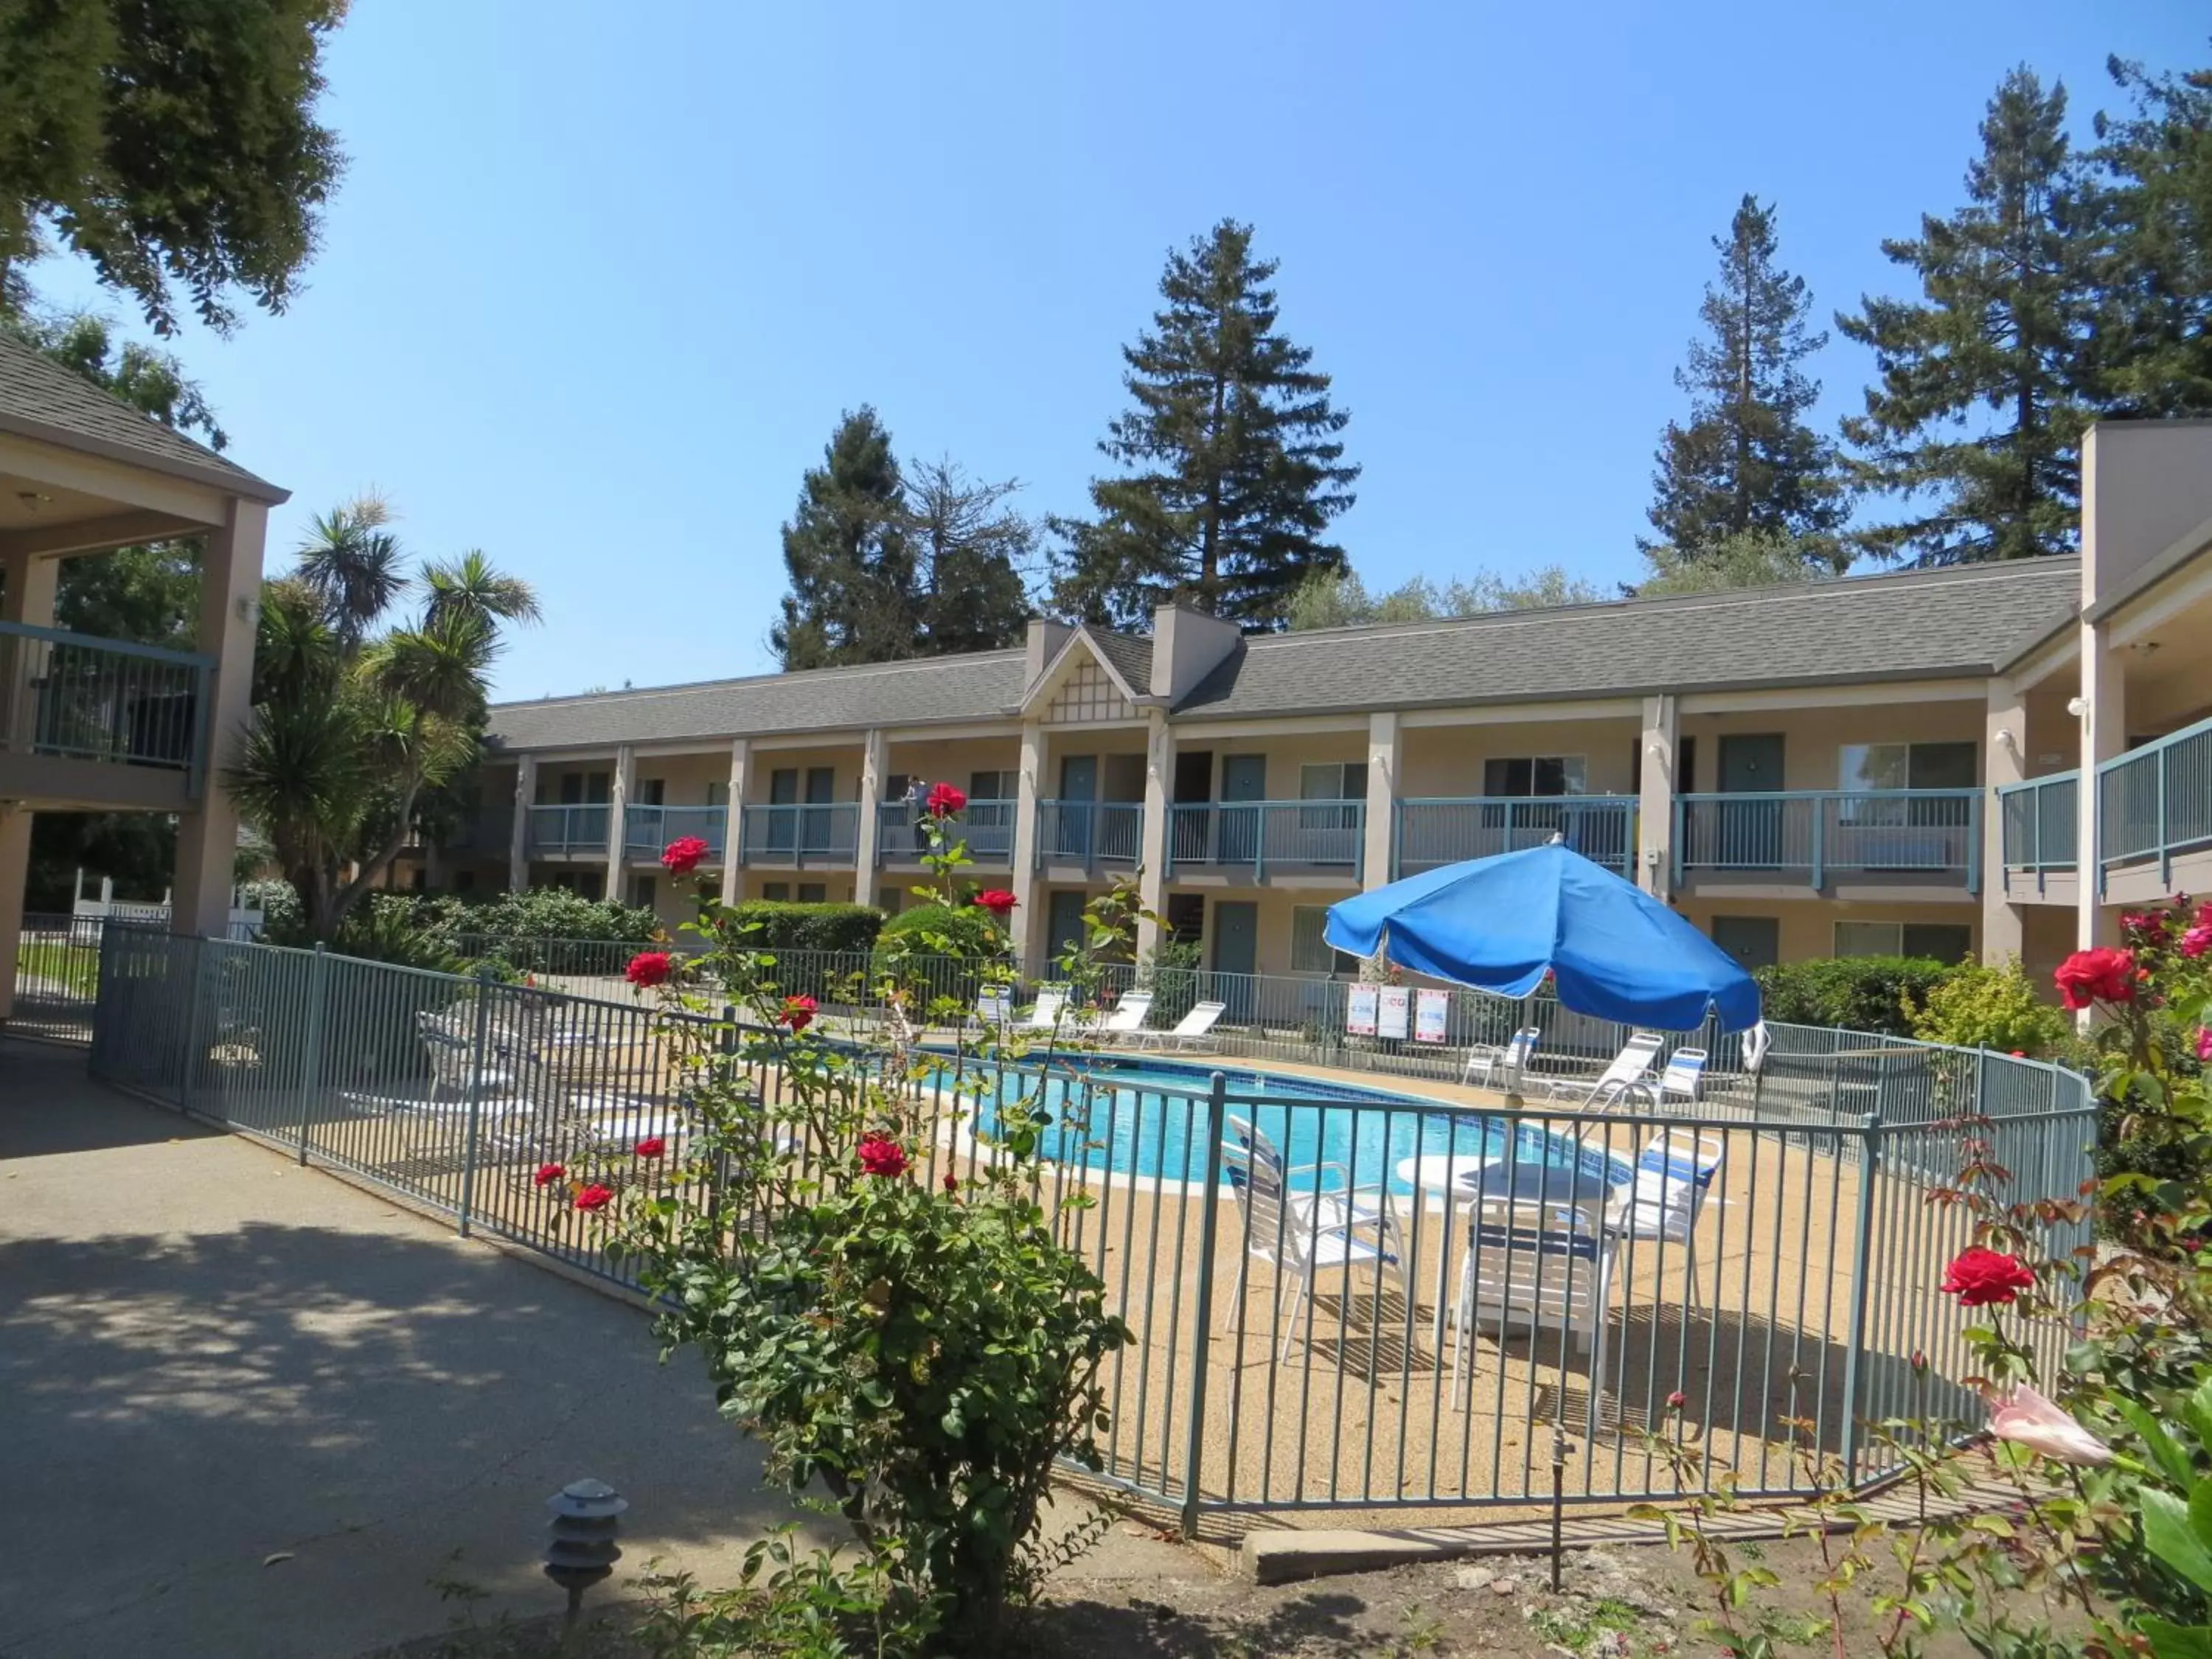 Property building, Pool View in Days Inn by Wyndham Redwood City